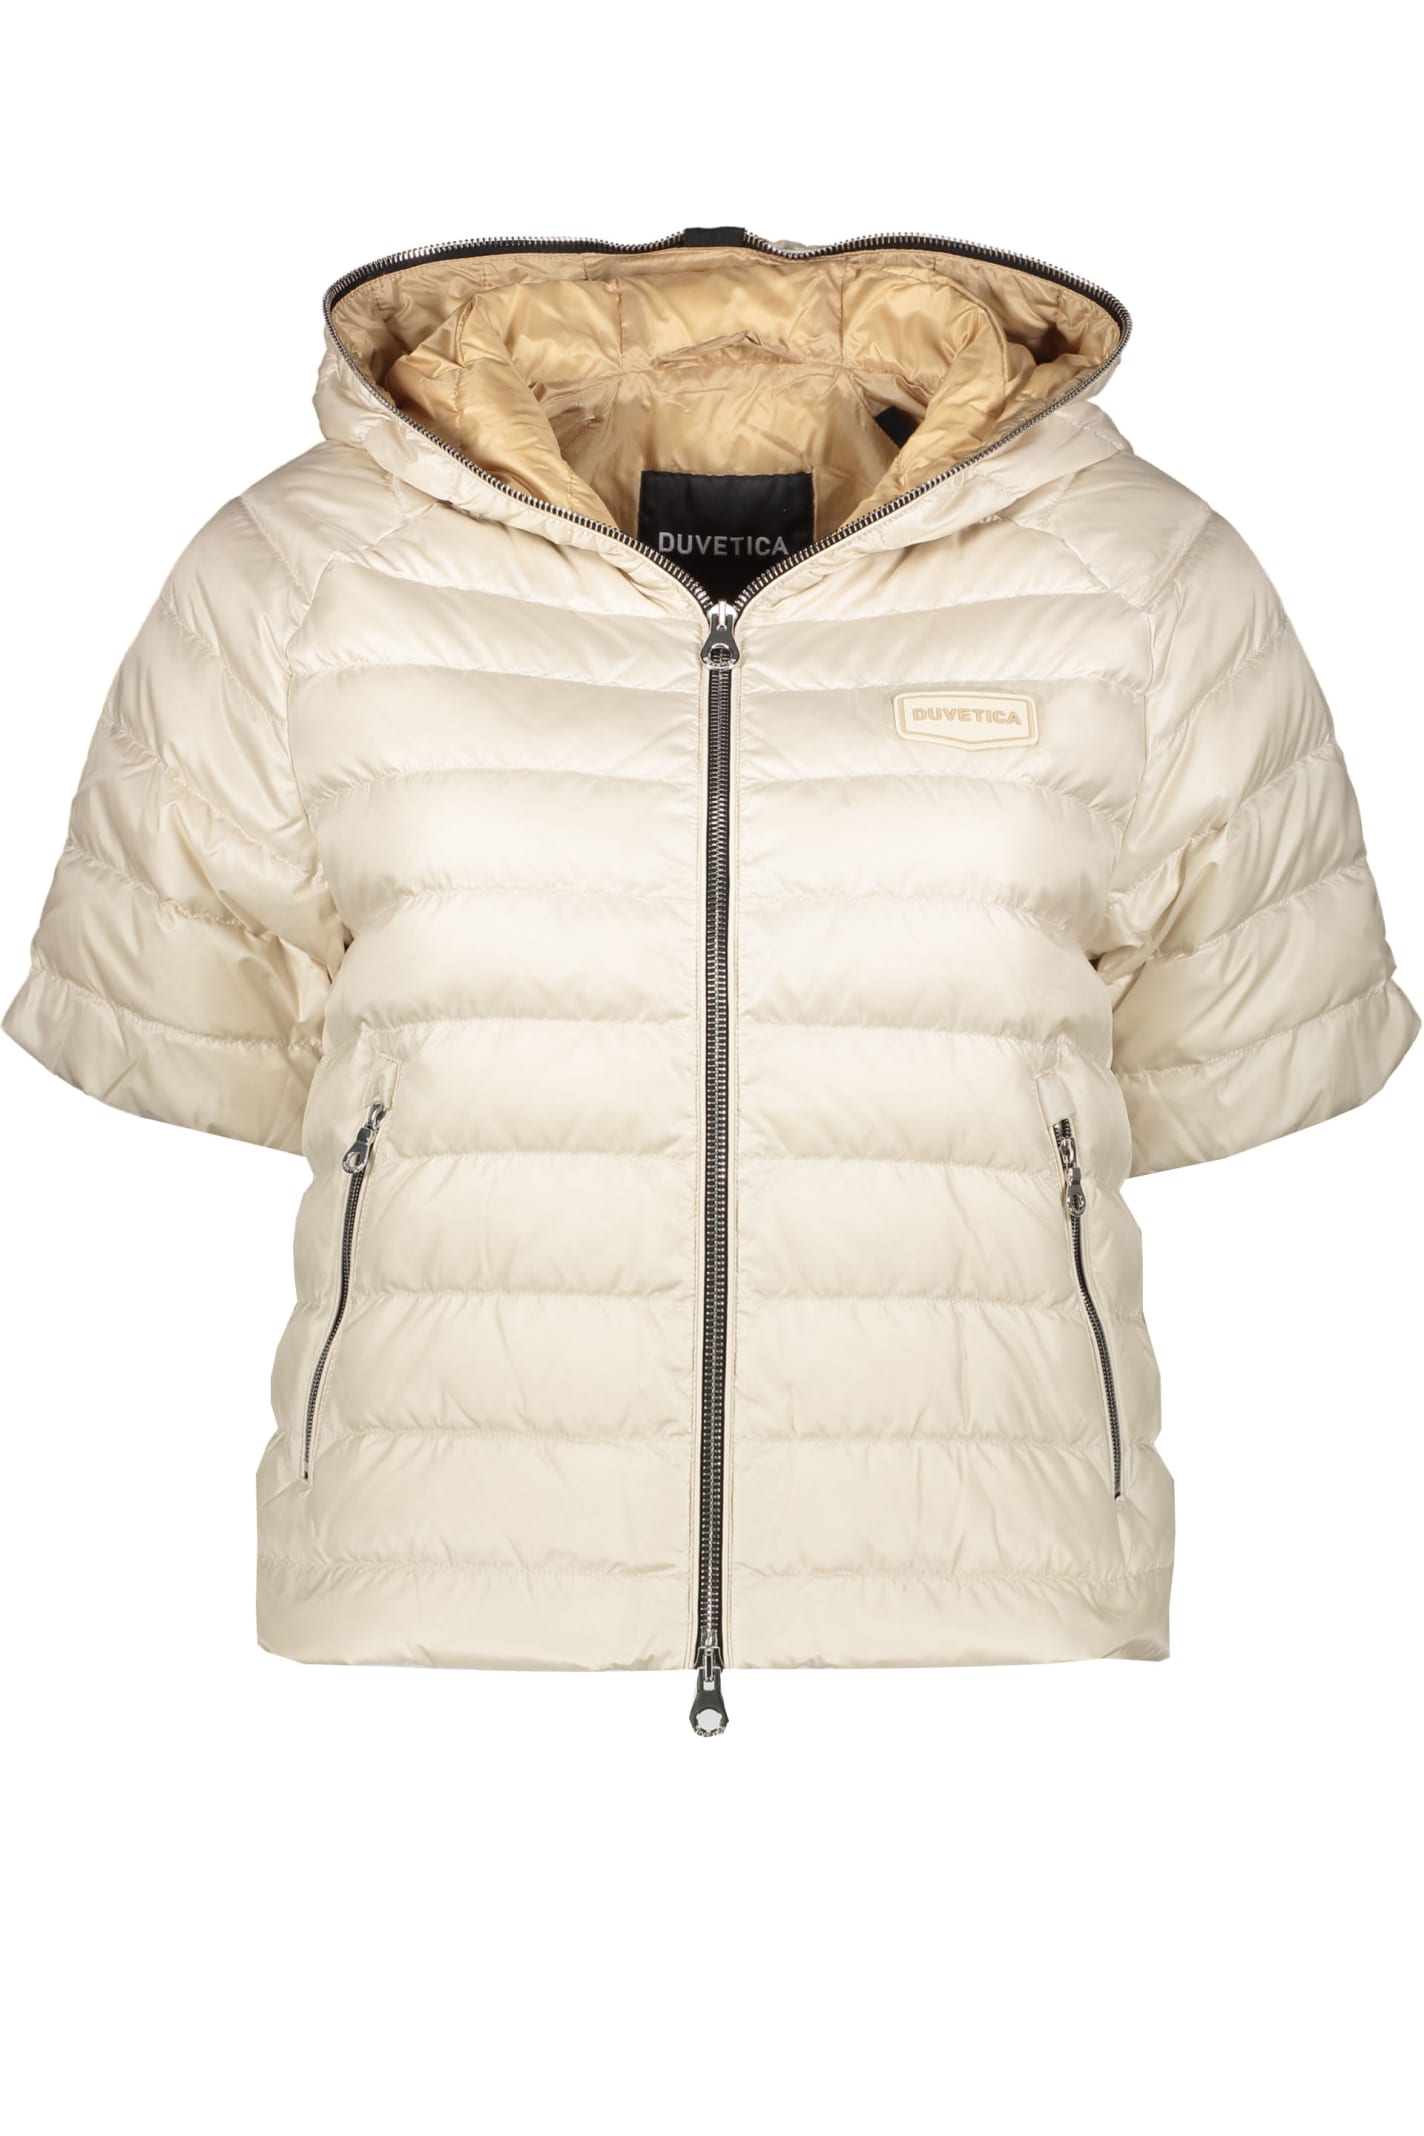 Duvetica Quilted Jacket In Beige